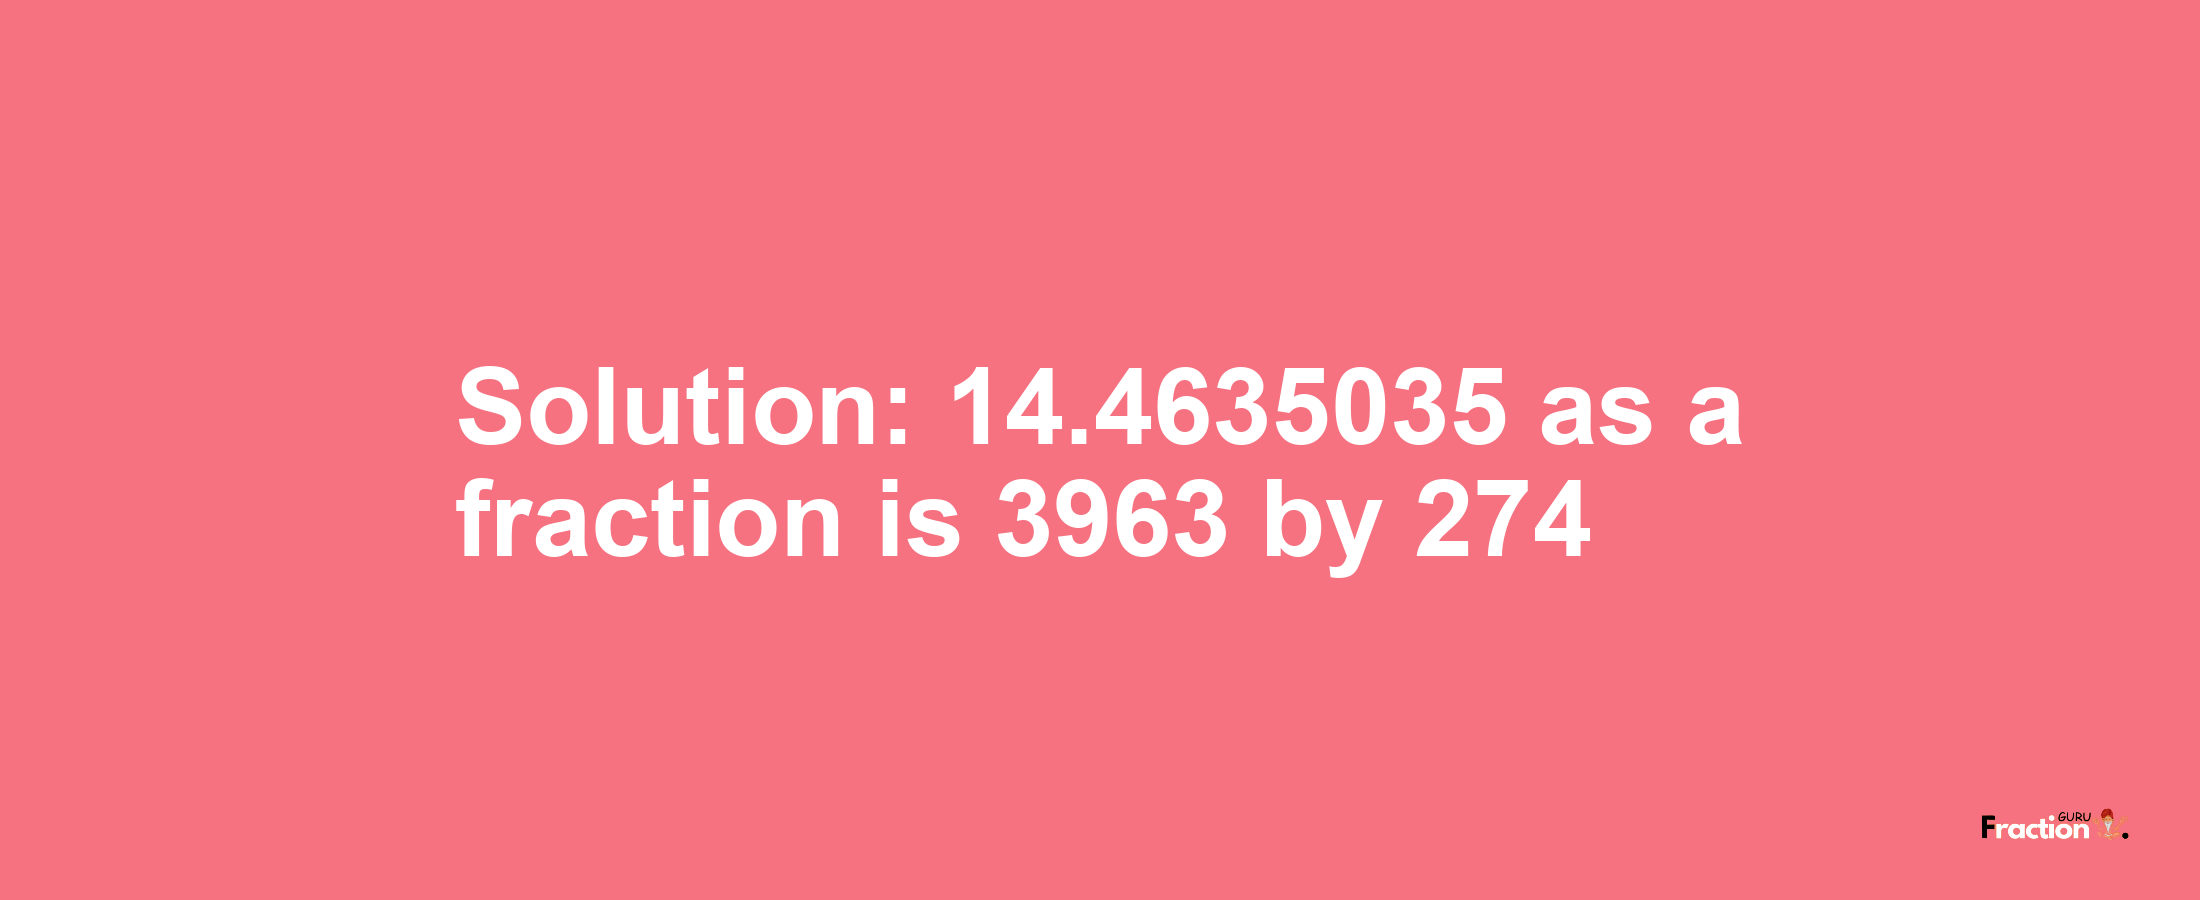 Solution:14.4635035 as a fraction is 3963/274